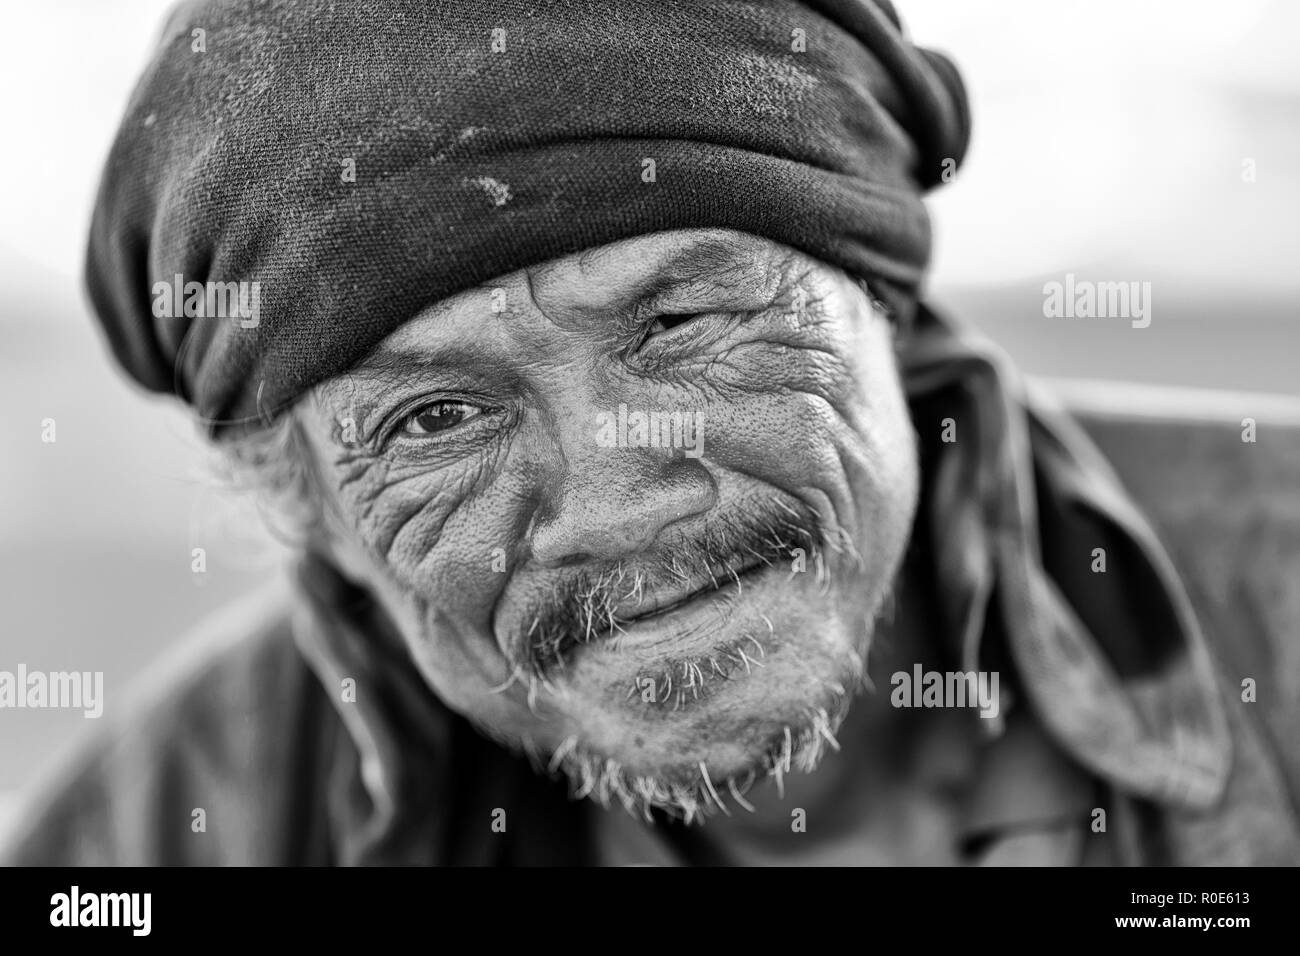 TRANG, THAILAND, JANUARY 11, 2016 : A homeless Thai man is posing in the street of Trang, Thailand Stock Photo